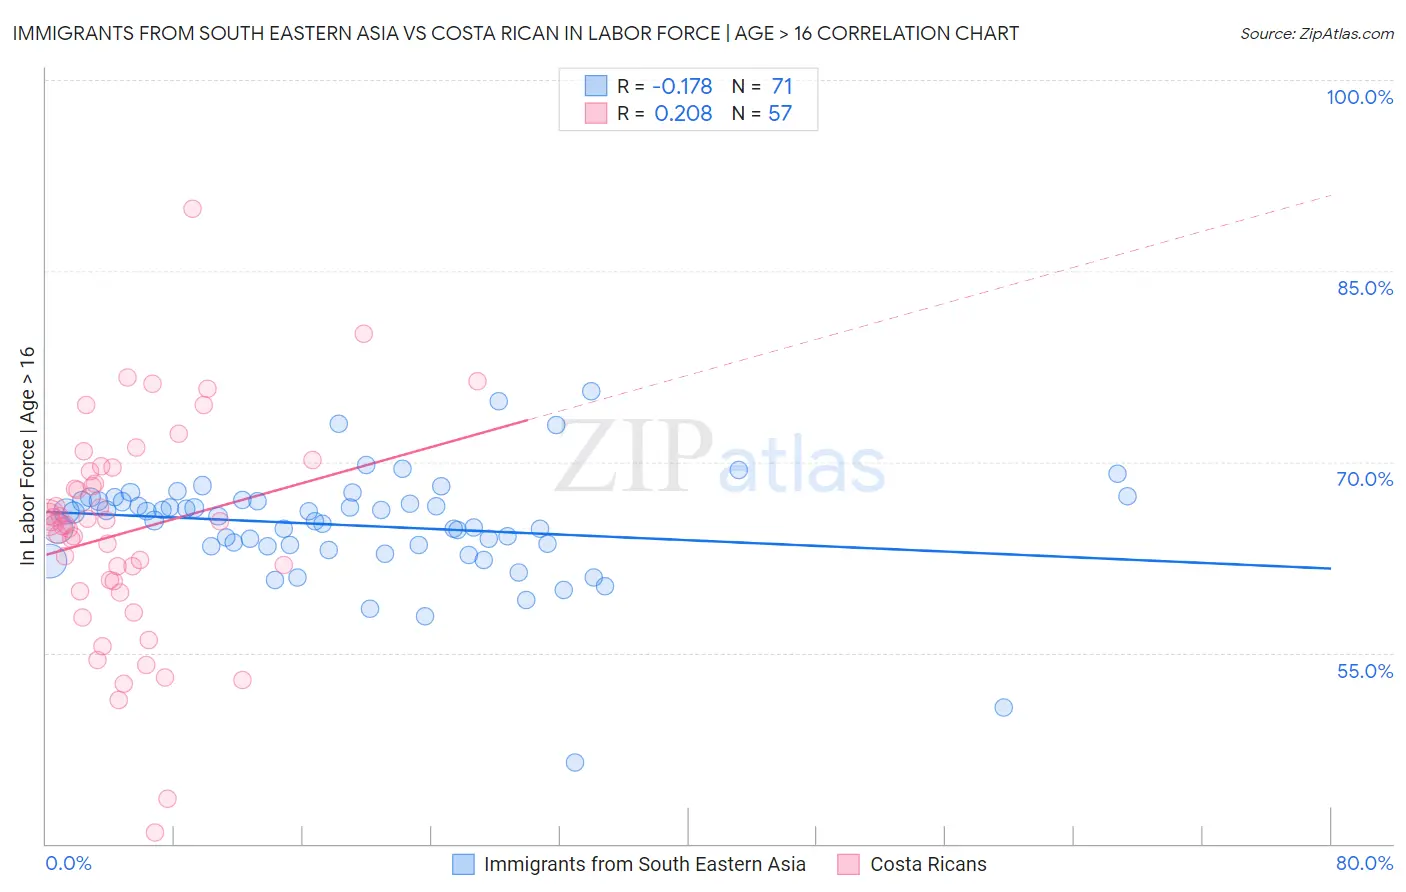 Immigrants from South Eastern Asia vs Costa Rican In Labor Force | Age > 16